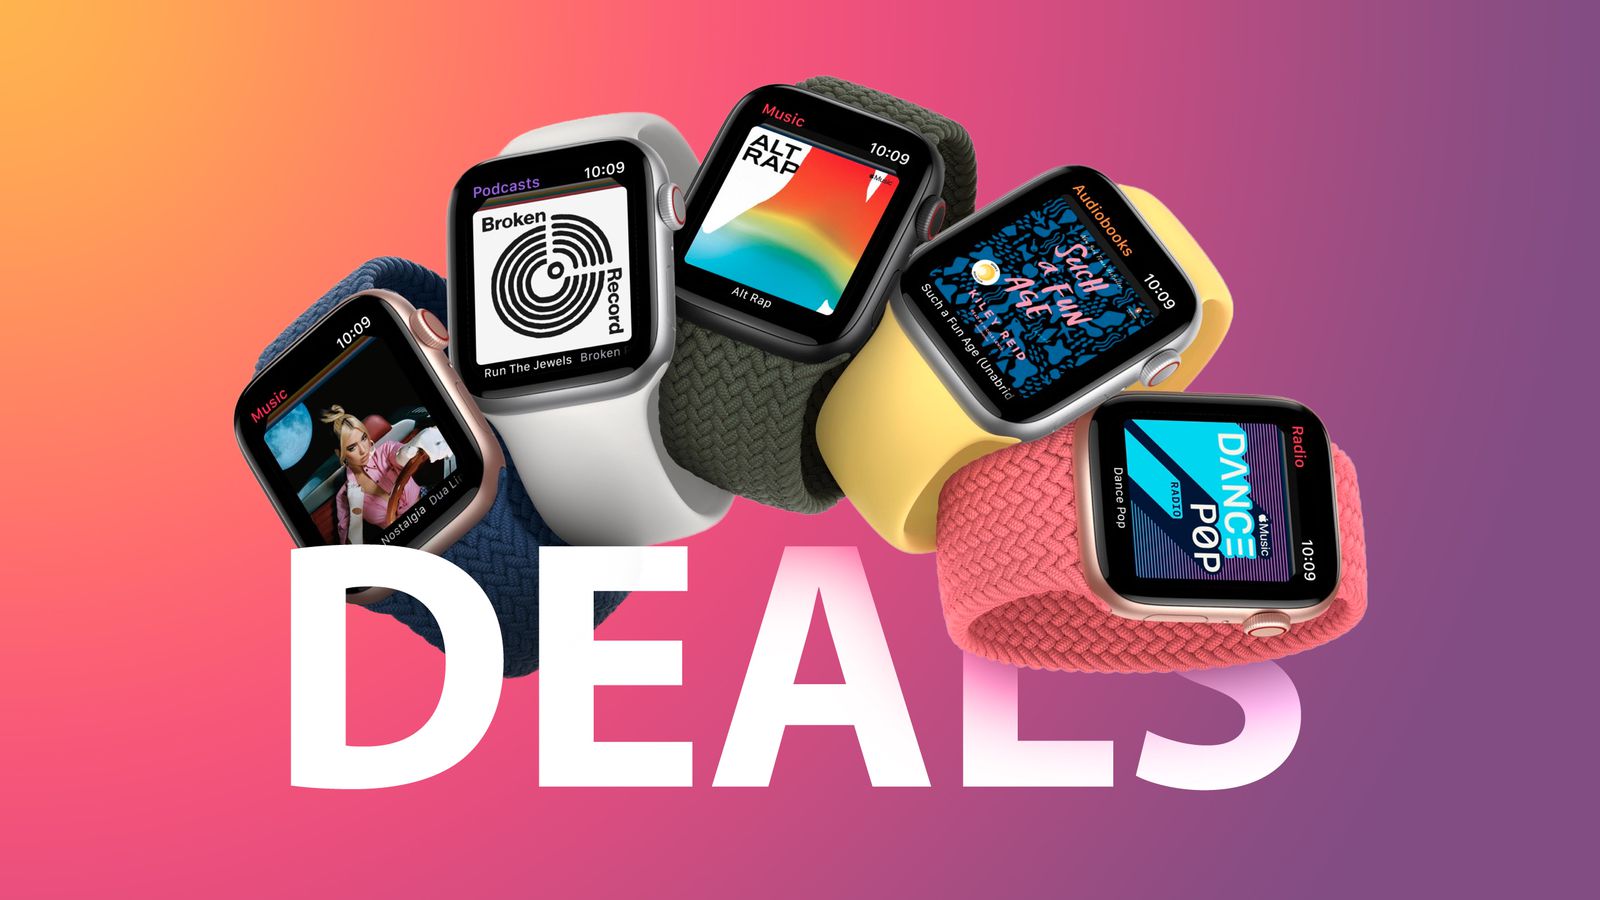 Deals: 40mm GPS Apple Watch Series 6 Returns to Record Low Price